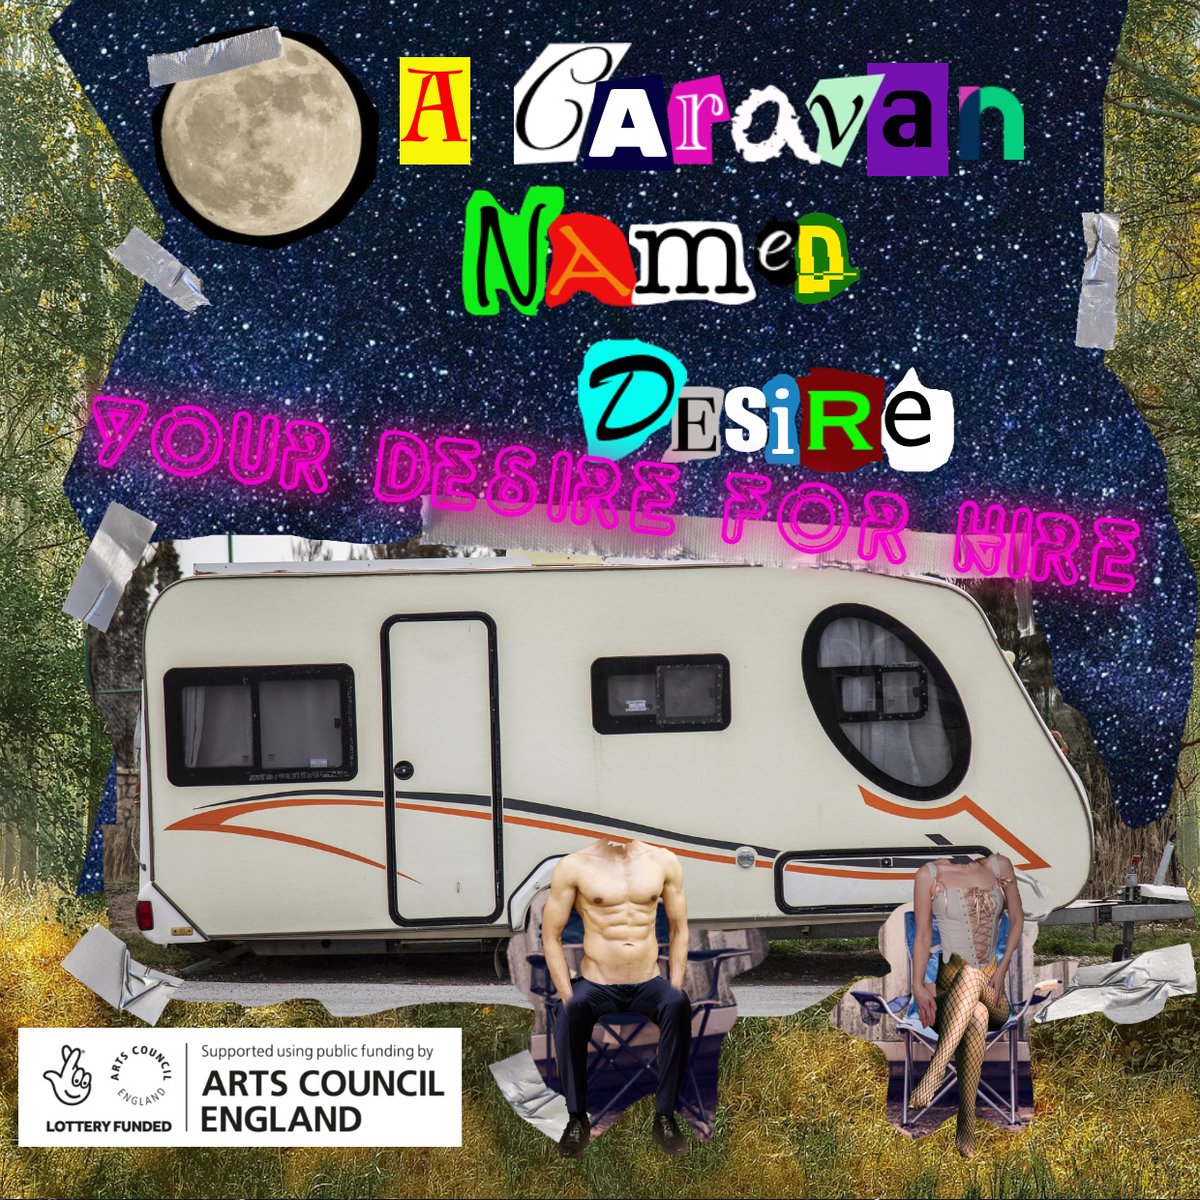 @SplitTheatre are bringing two shows to this year’s @brightonfringe and we can’t wait to see them both!!

Join us as we visit Krystal, your desire for hire, in her caravan of love in Split’s BRAND NEW production #ACaravanNamedDesire at @RotundaDome  
30th May – 3rd June!